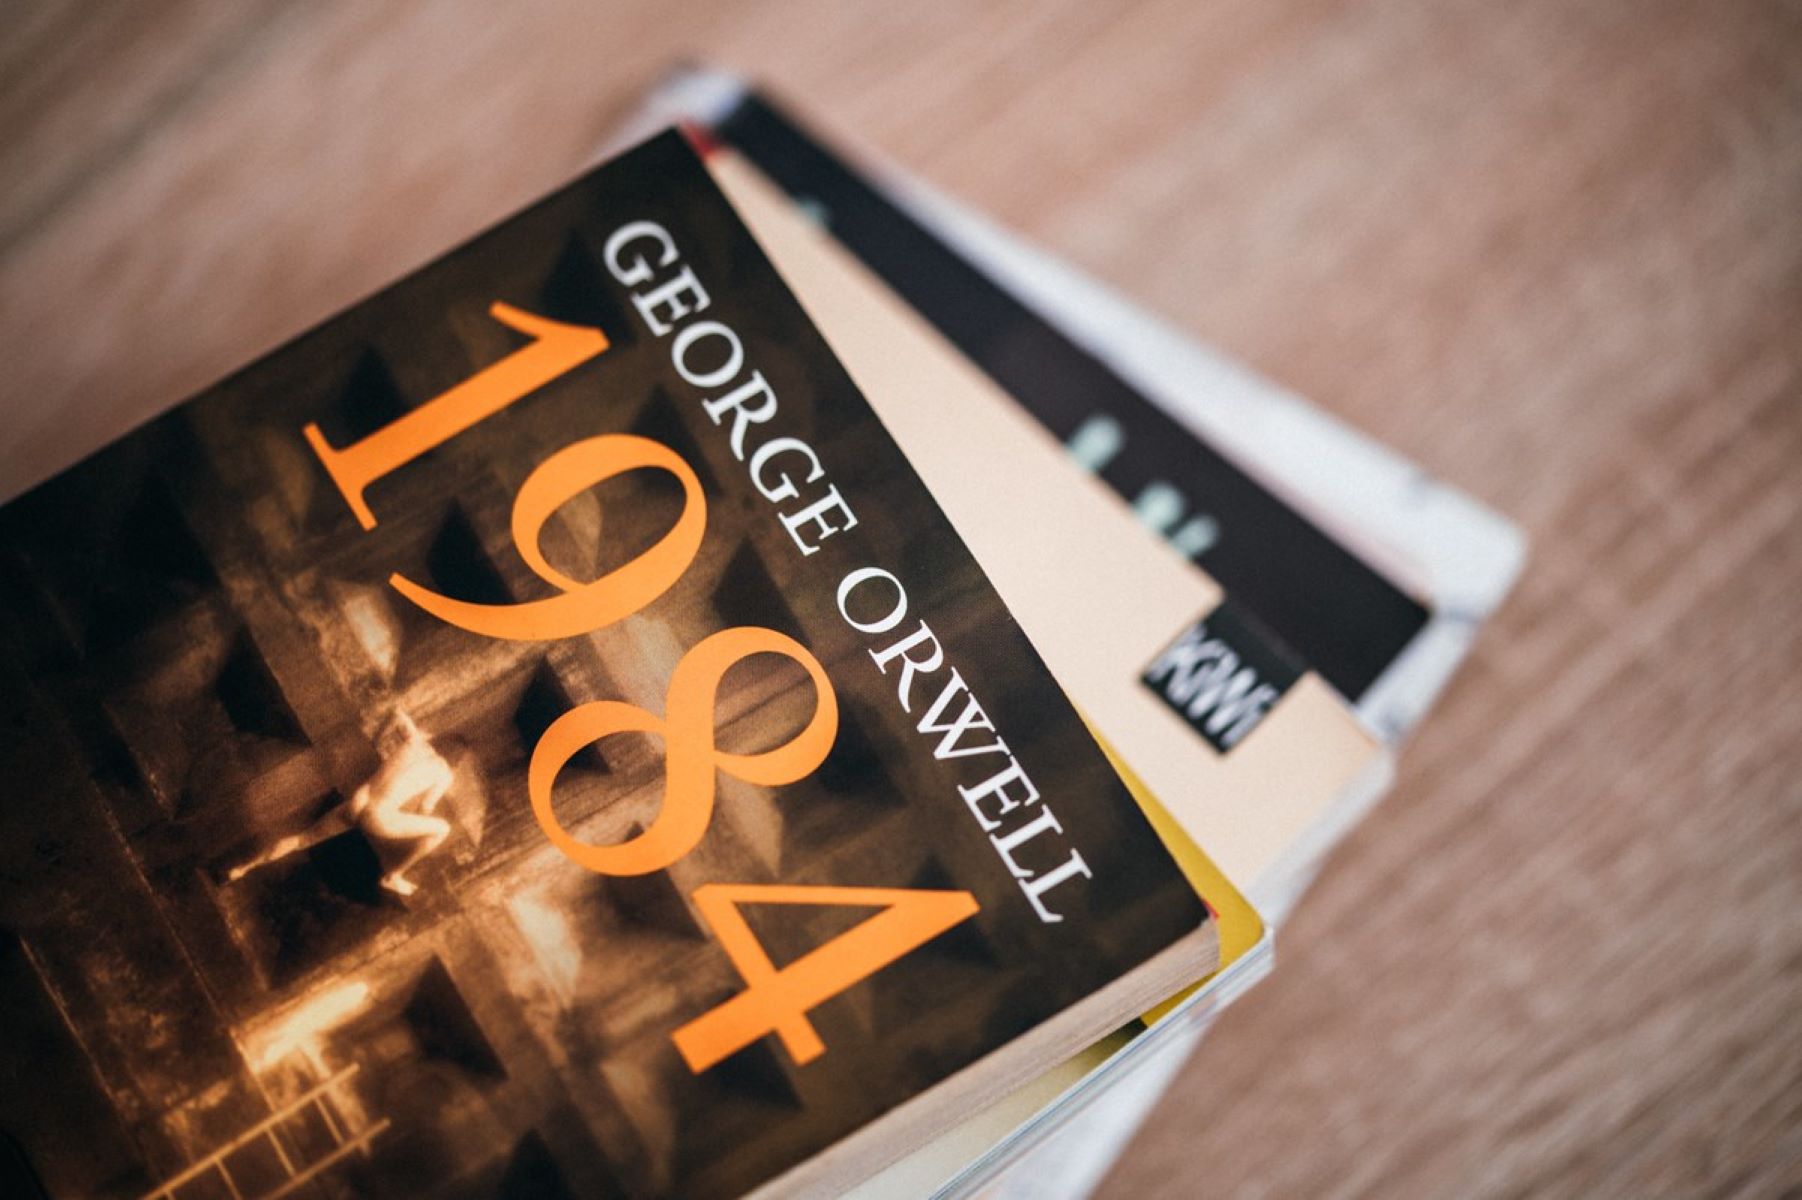 9-astounding-facts-about-1984-george-orwell